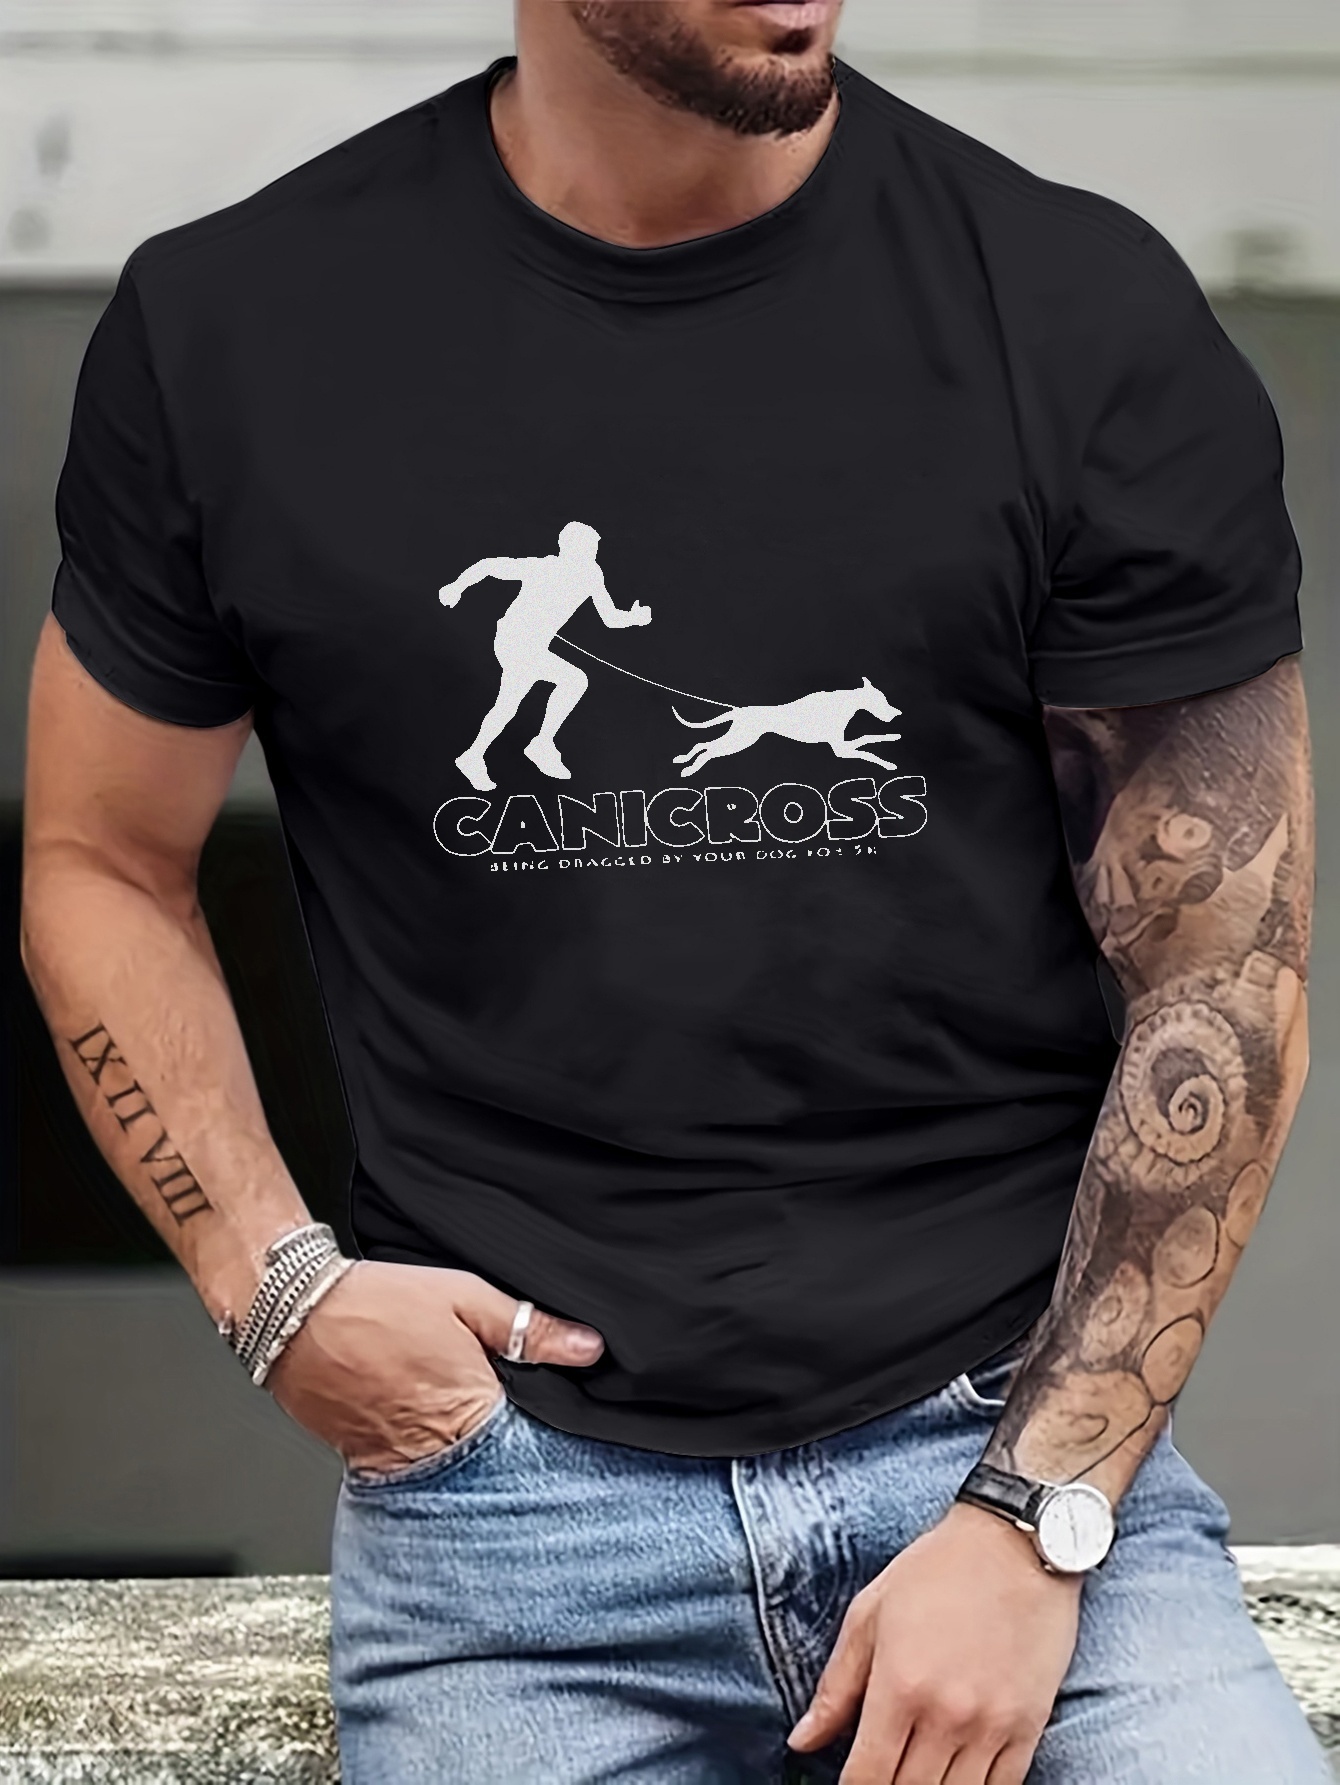 Plus Size Men's Casual Graphic Tees For Summer, 